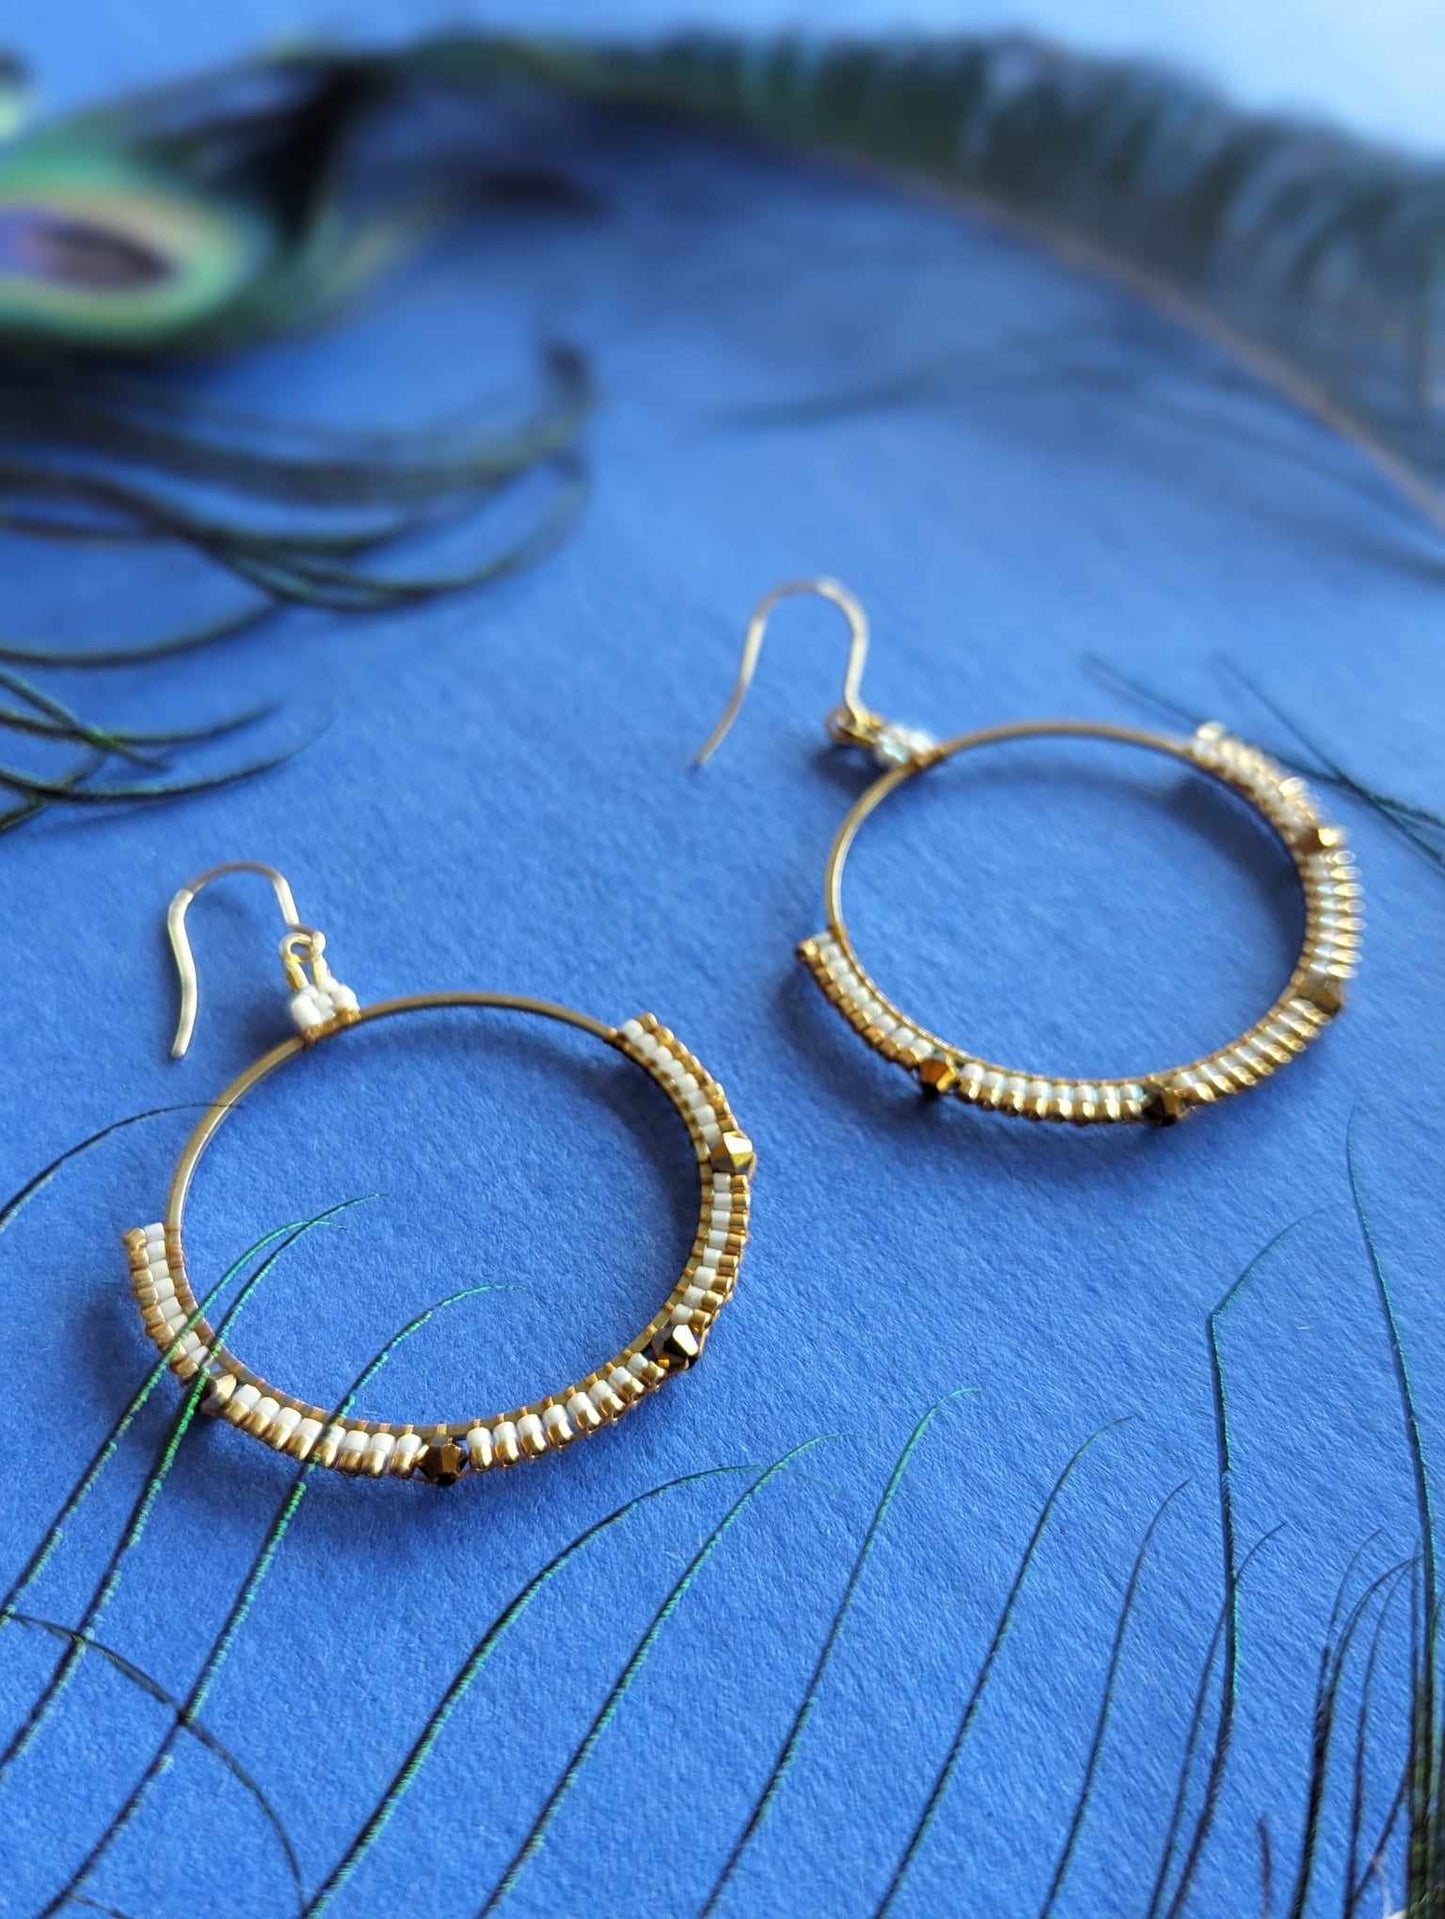 White and Gold Hoop Earrings